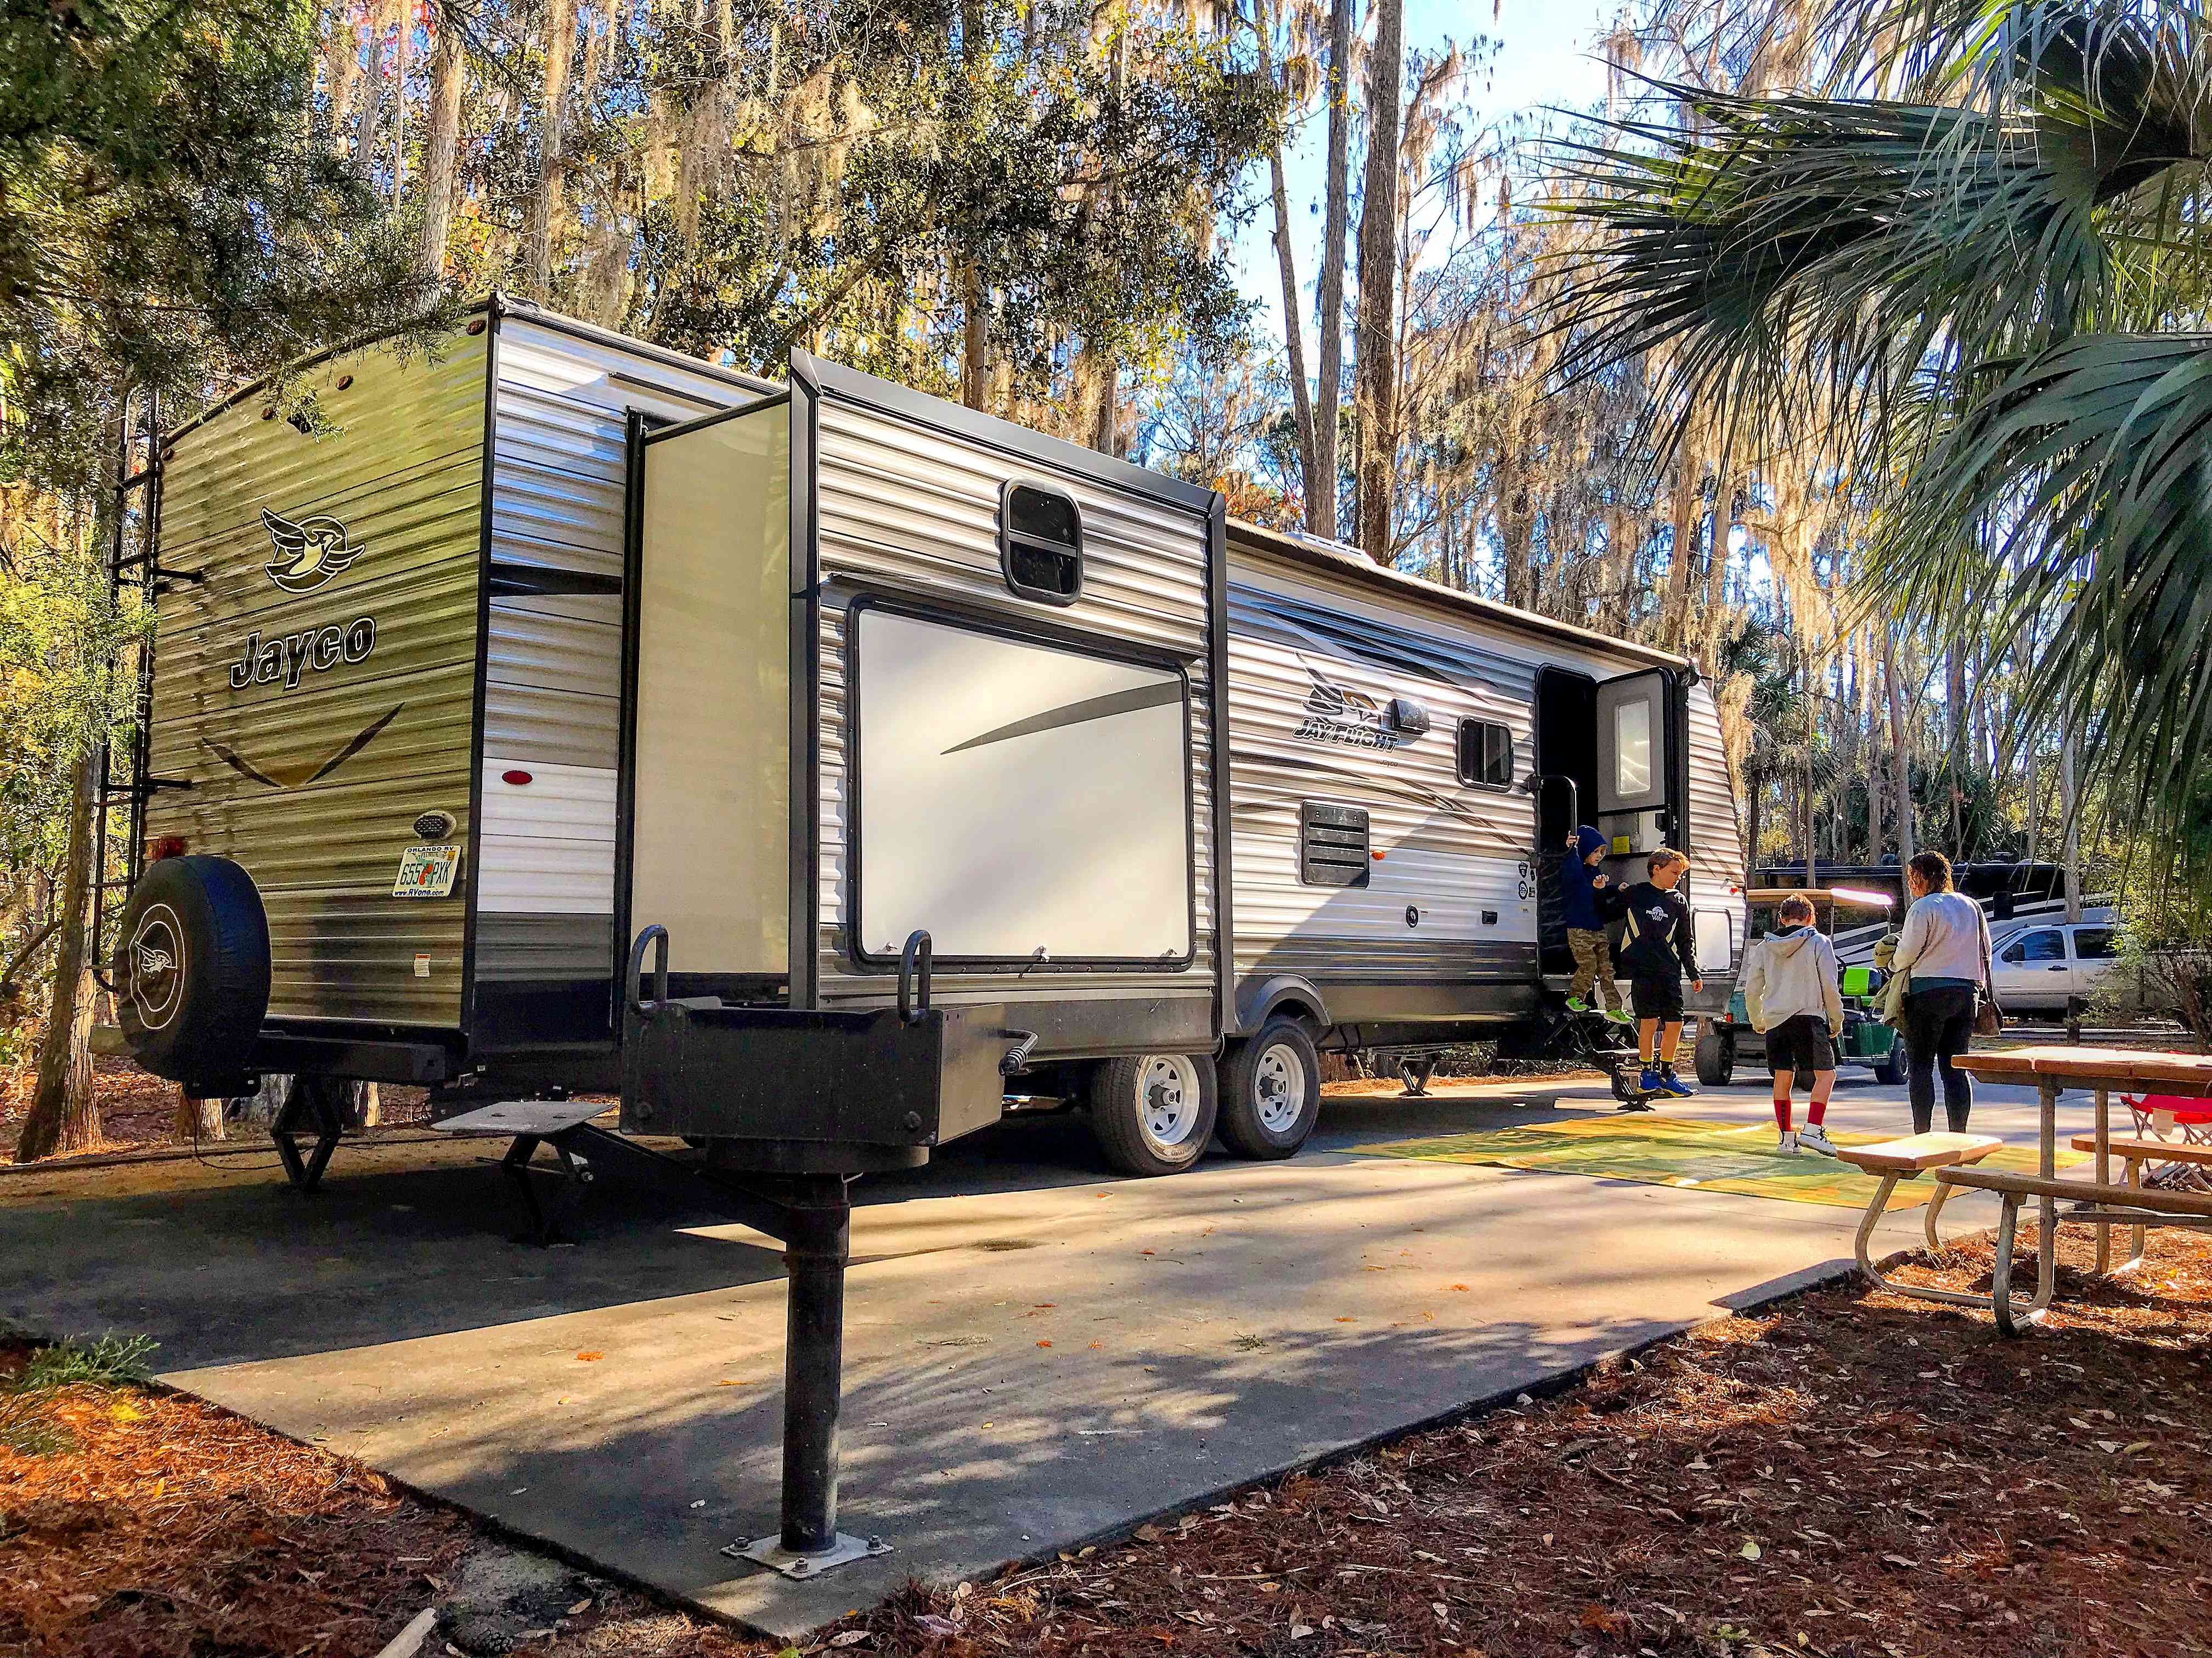 Travel Trailer at campground